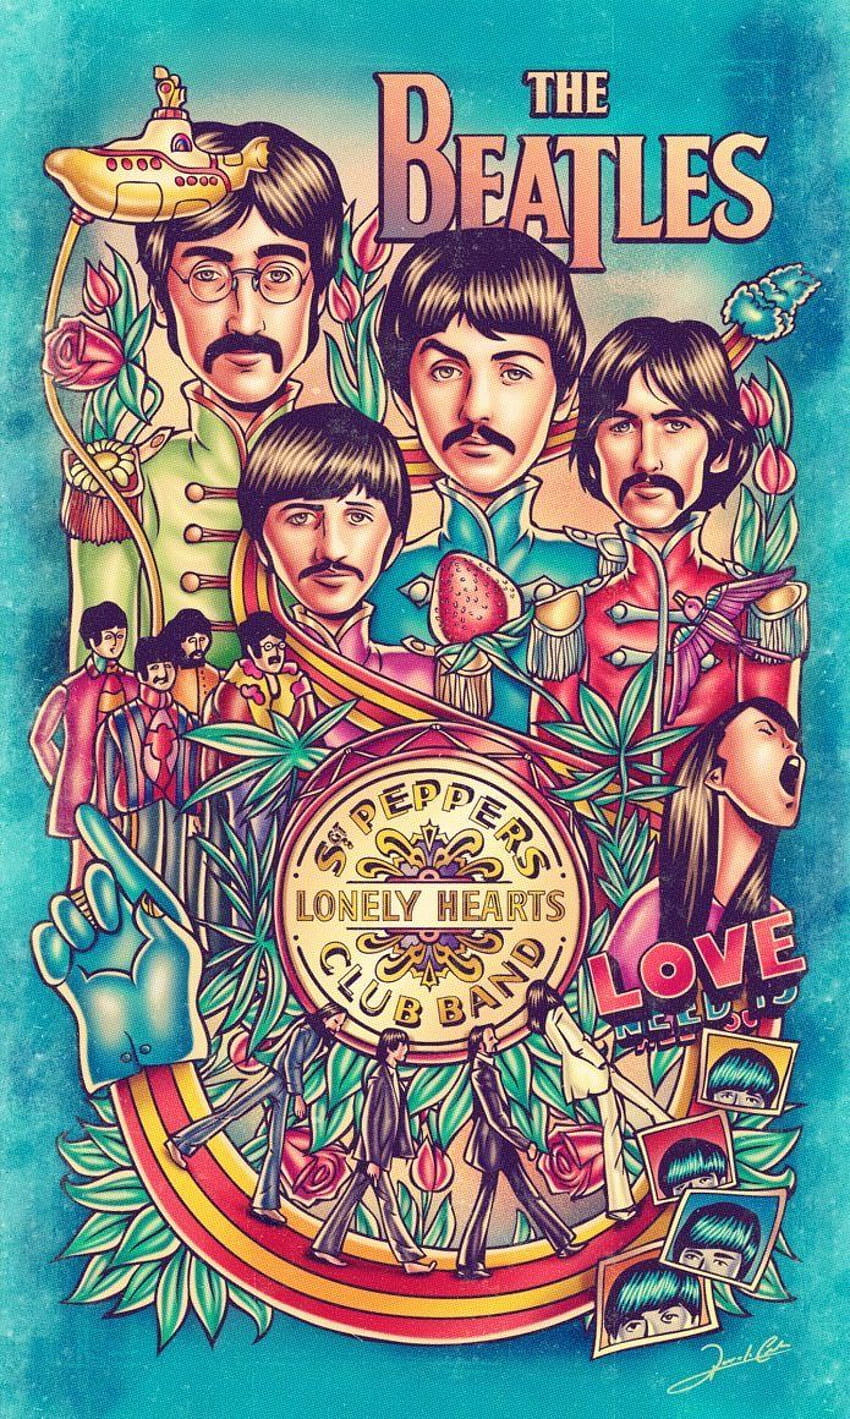 Sargent Peppers Lonely Hearts Club Band, band klub sgt peppers lonely hearts wallpaper ponsel HD